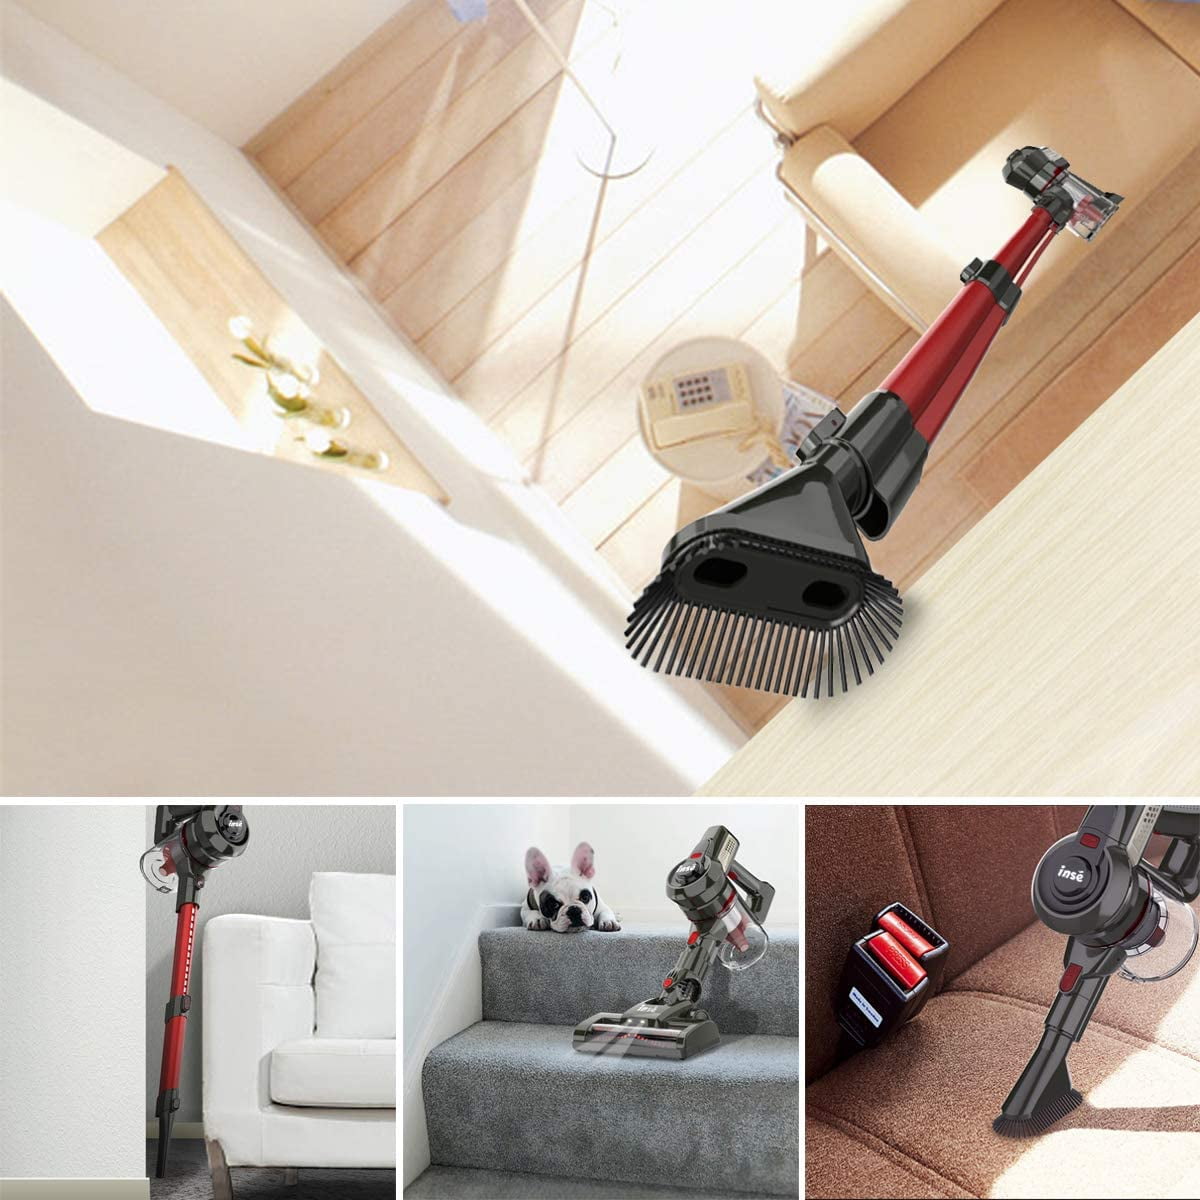 INSE Cordless Vacuum Cleaner, 6-in-1 Rechargeable Stick Vacuum, 20kPa Powerful Lightweight Vacuum Cleaner up to 45 Mins Runtime, for Home Hard Floor Carpet Pet Hair - 3